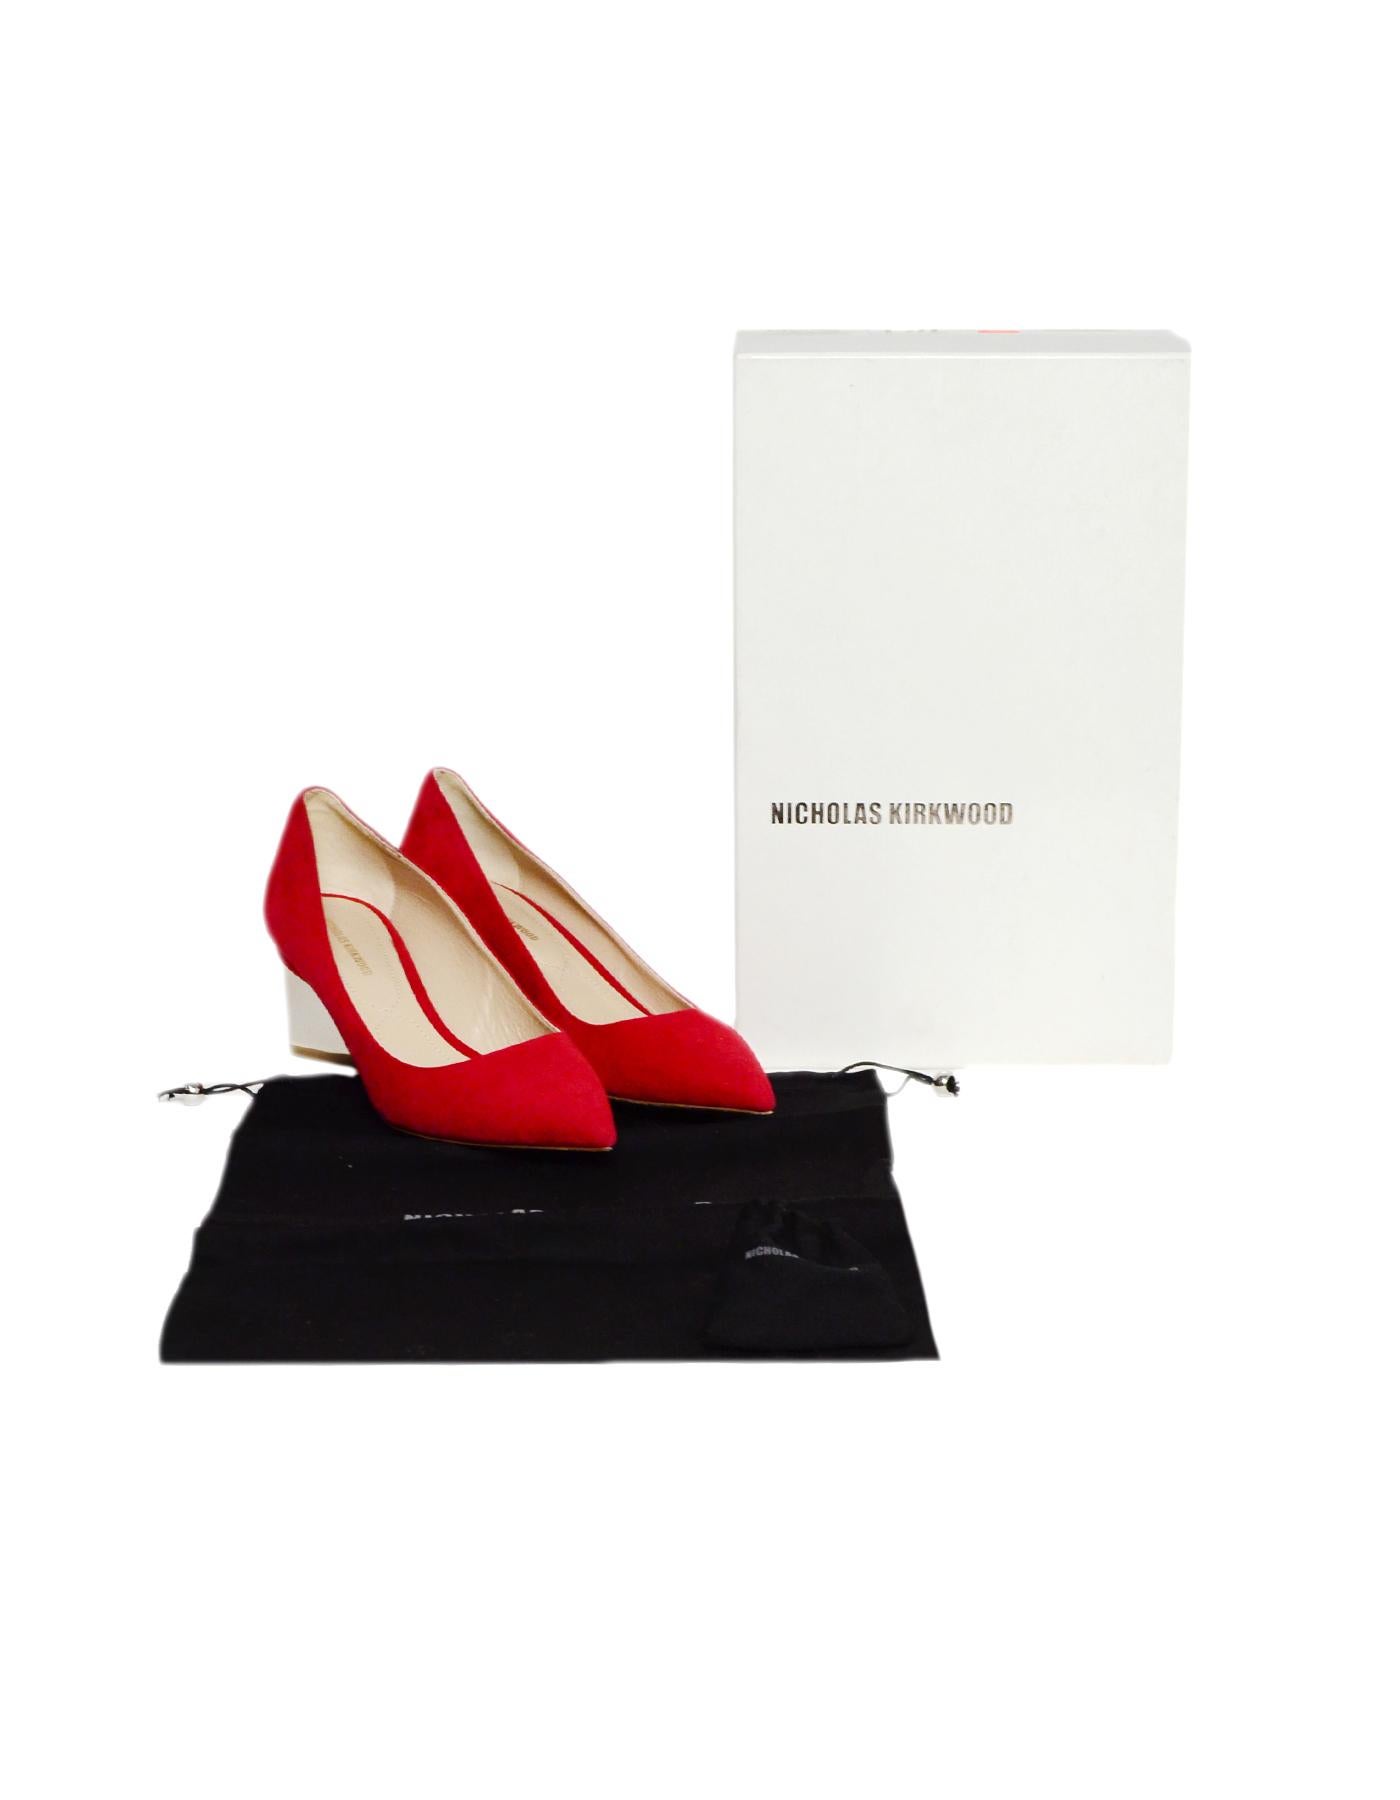 Nicholas Kirkwood Red Suede Prism Pumps w/ Silver Heels sz 37.5 rt $595

Made In: Italy
Color: Red, silver
Materials: Suede
Closure/Opening: Slide on
Overall Condition: Excellent pre-owned condition, with the exception of minor wear to